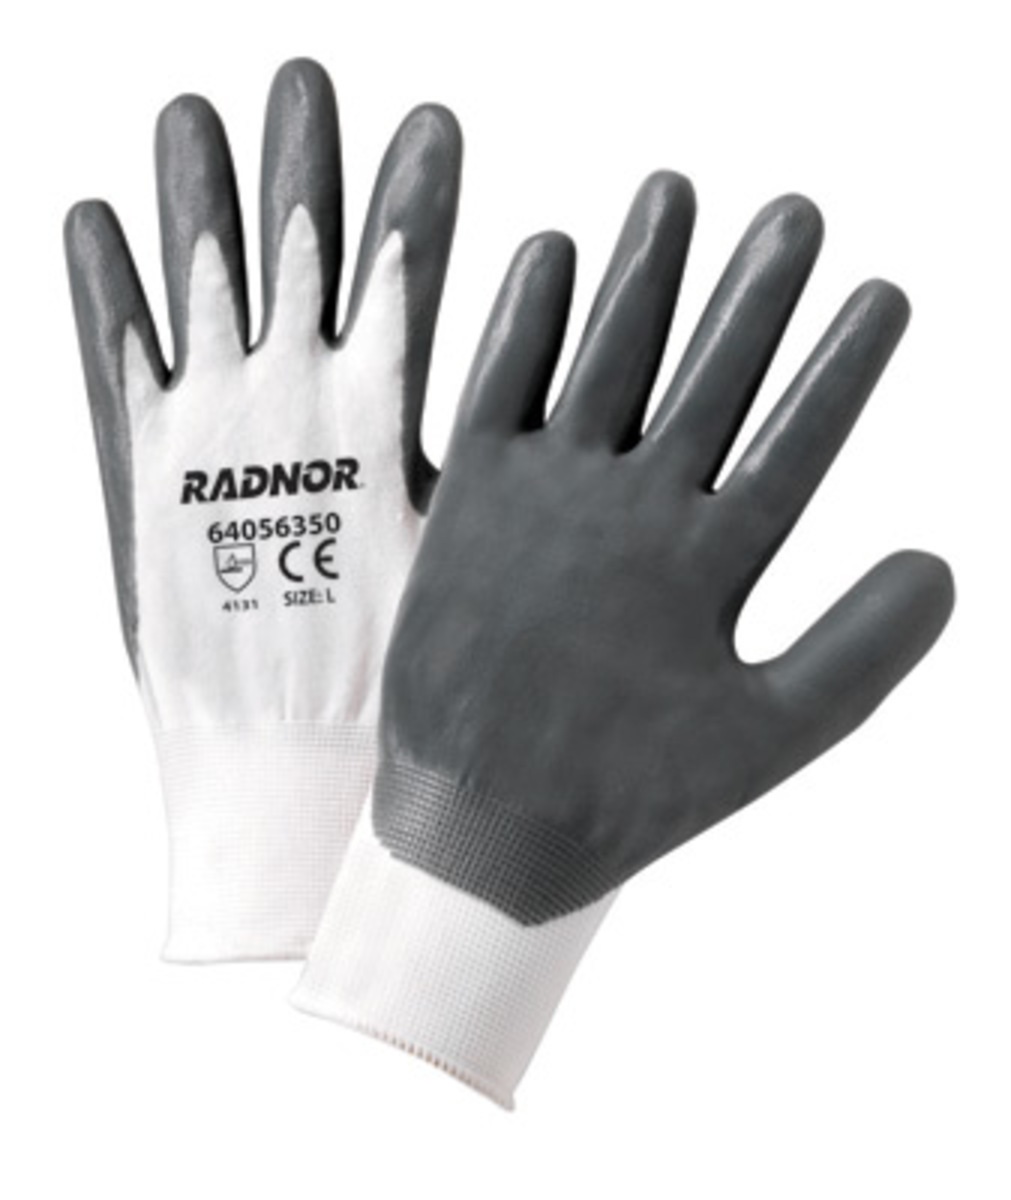 RADNOR® Medium 13 Gauge Gray Nitrile Palm And Finger Coated Work Gloves With White Nylon Liner And Knit Wrist